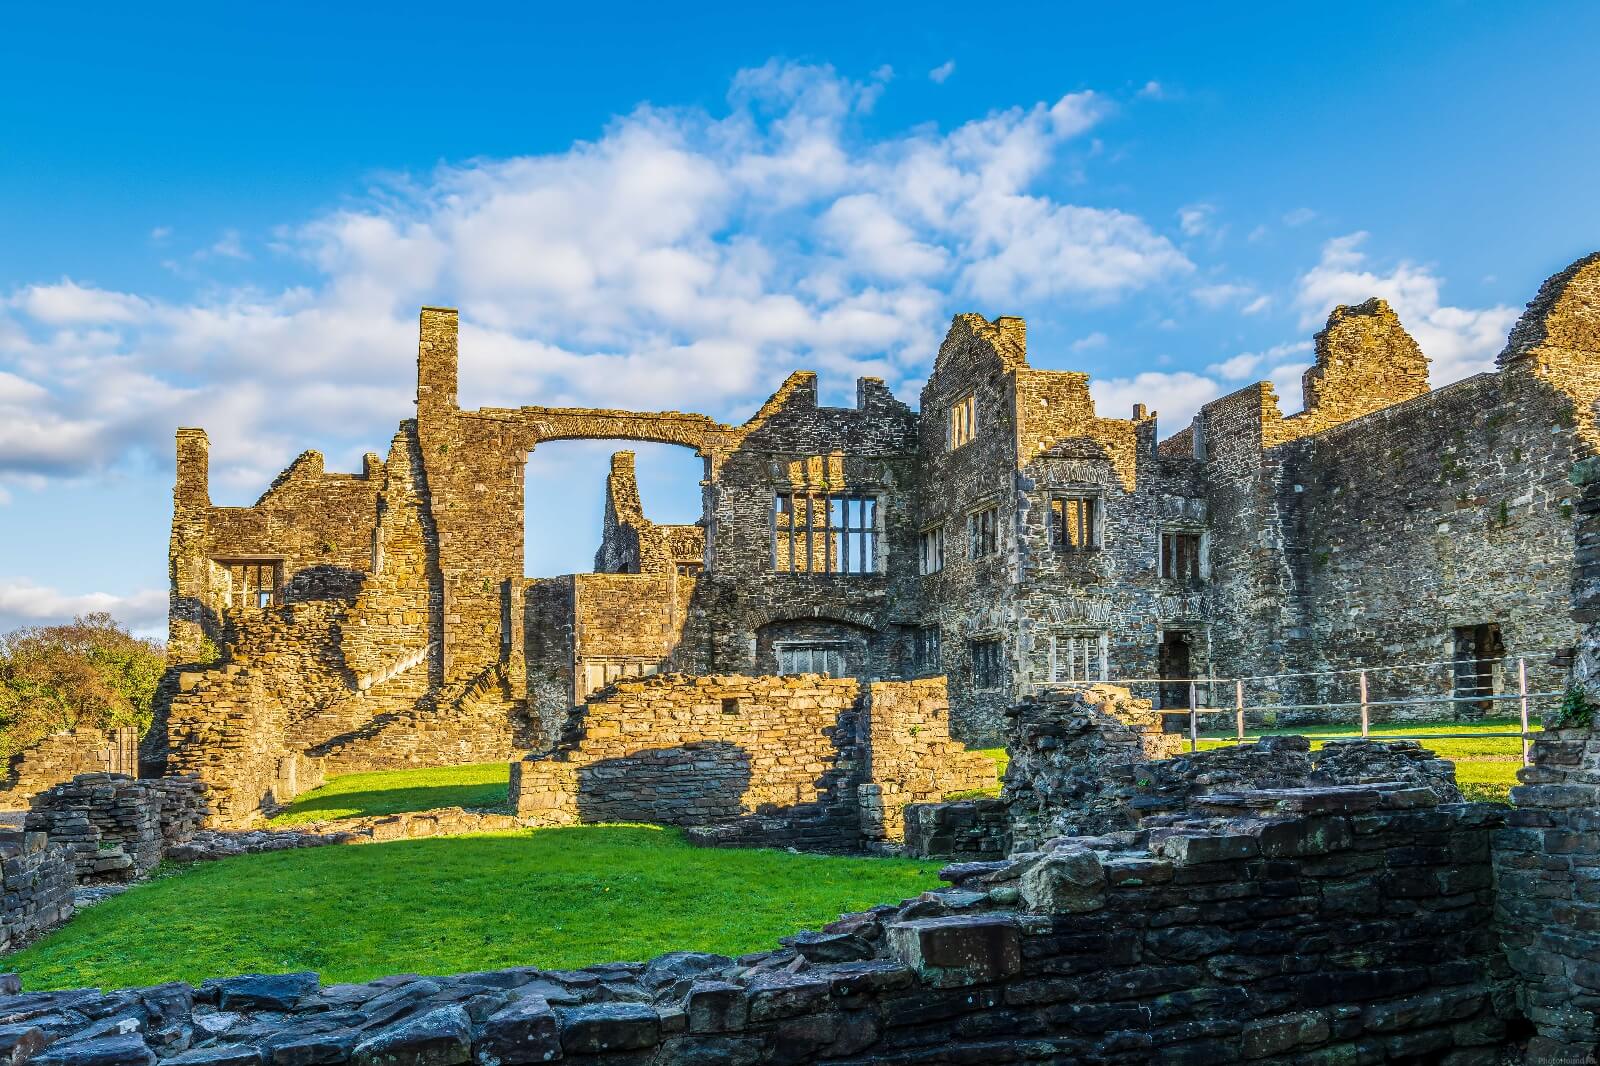 Image of Neath Abbey - Exterior by Steven Godwin